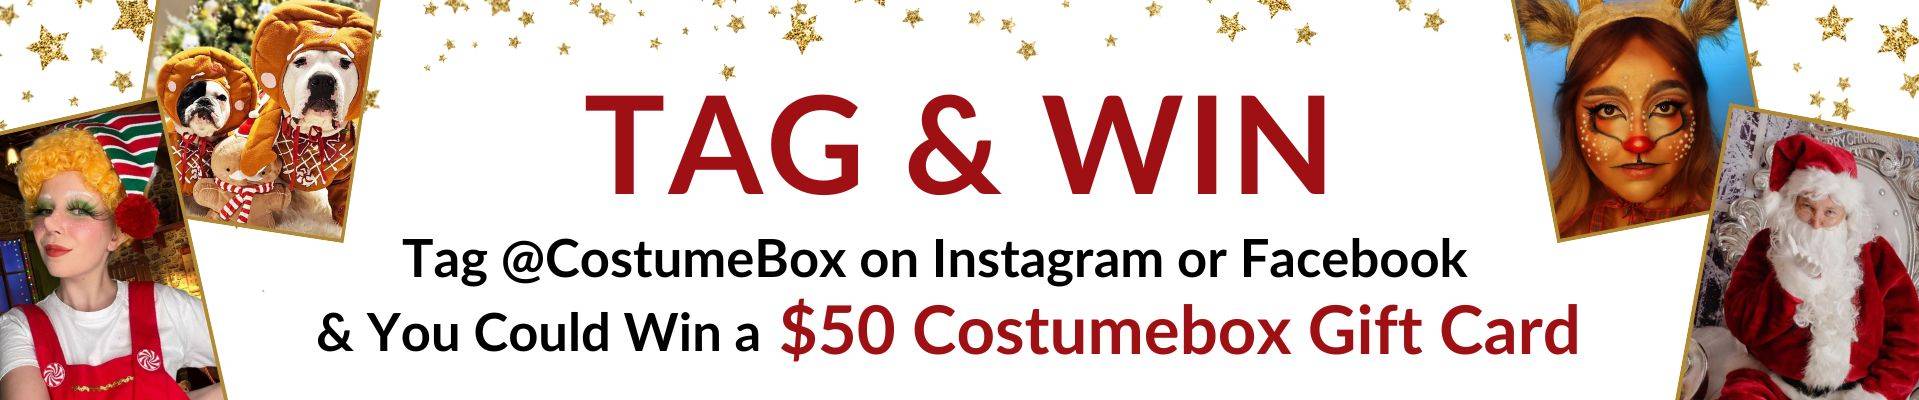 Tag and Win Competition for People mentioning CostumeBox in their Social Media Posts